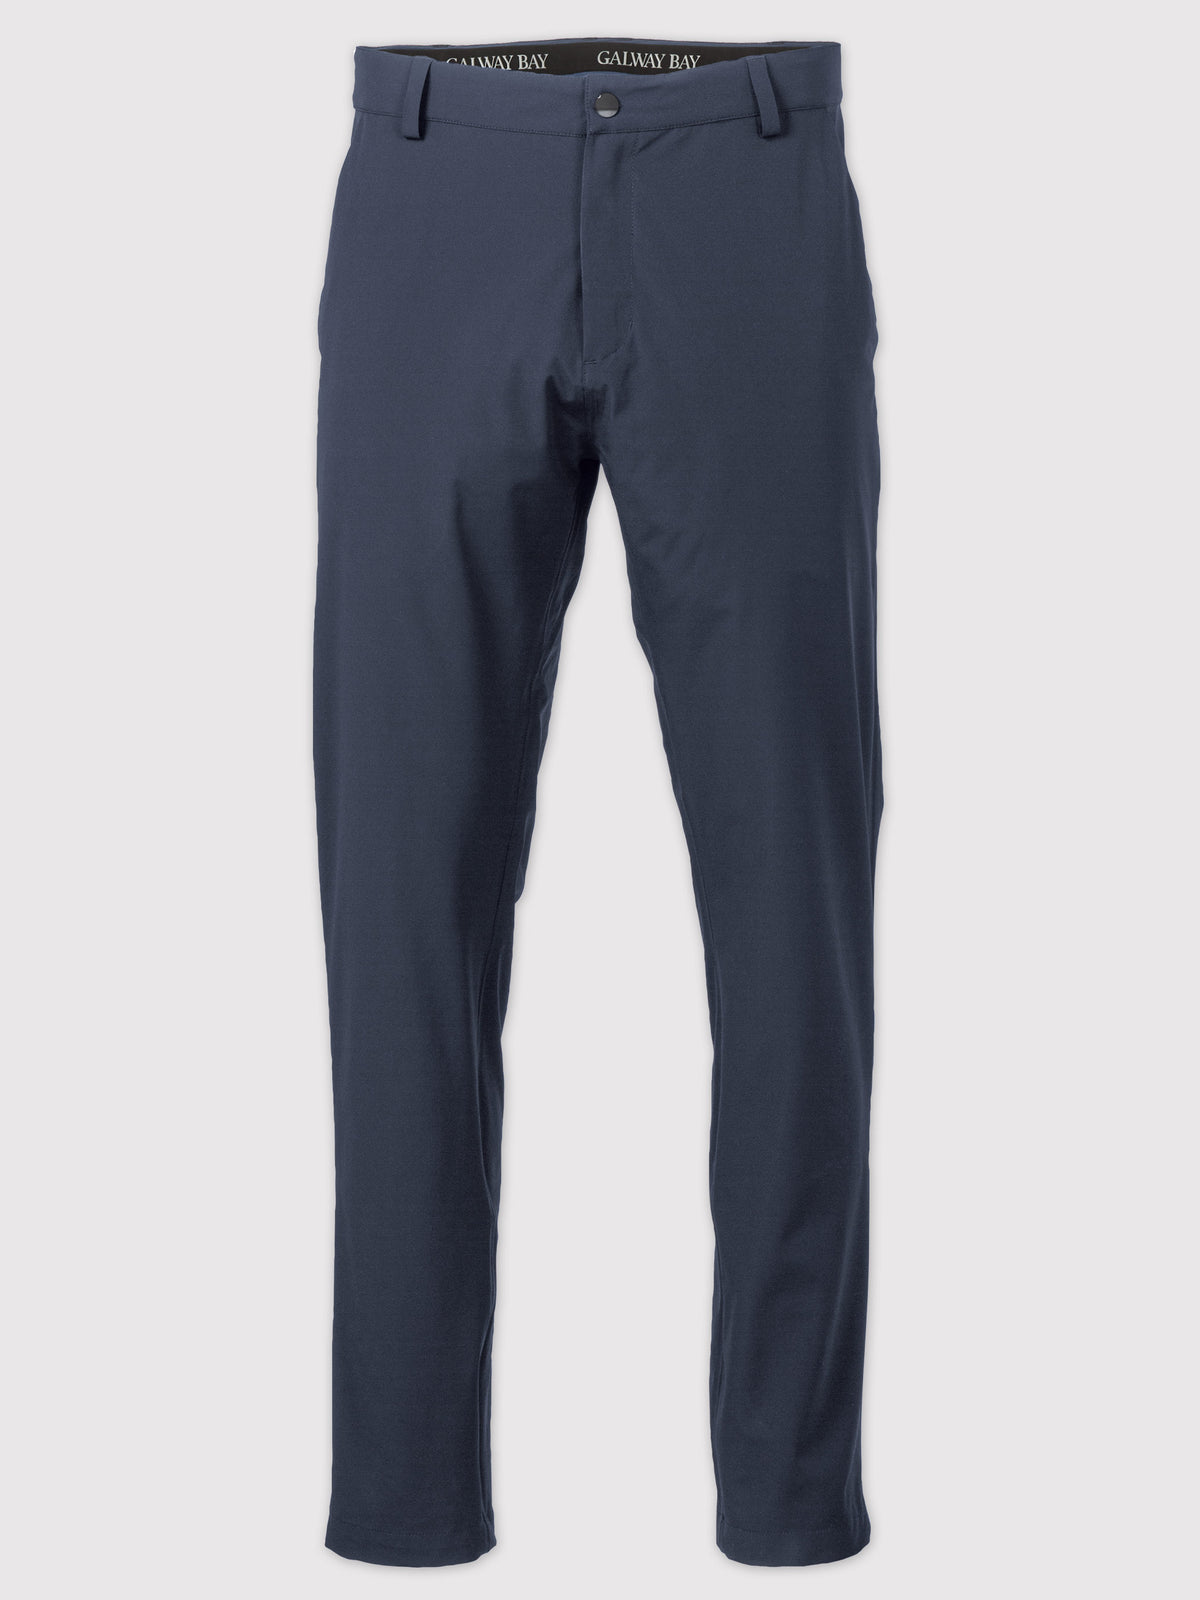 Slate blue All-Weather Chino